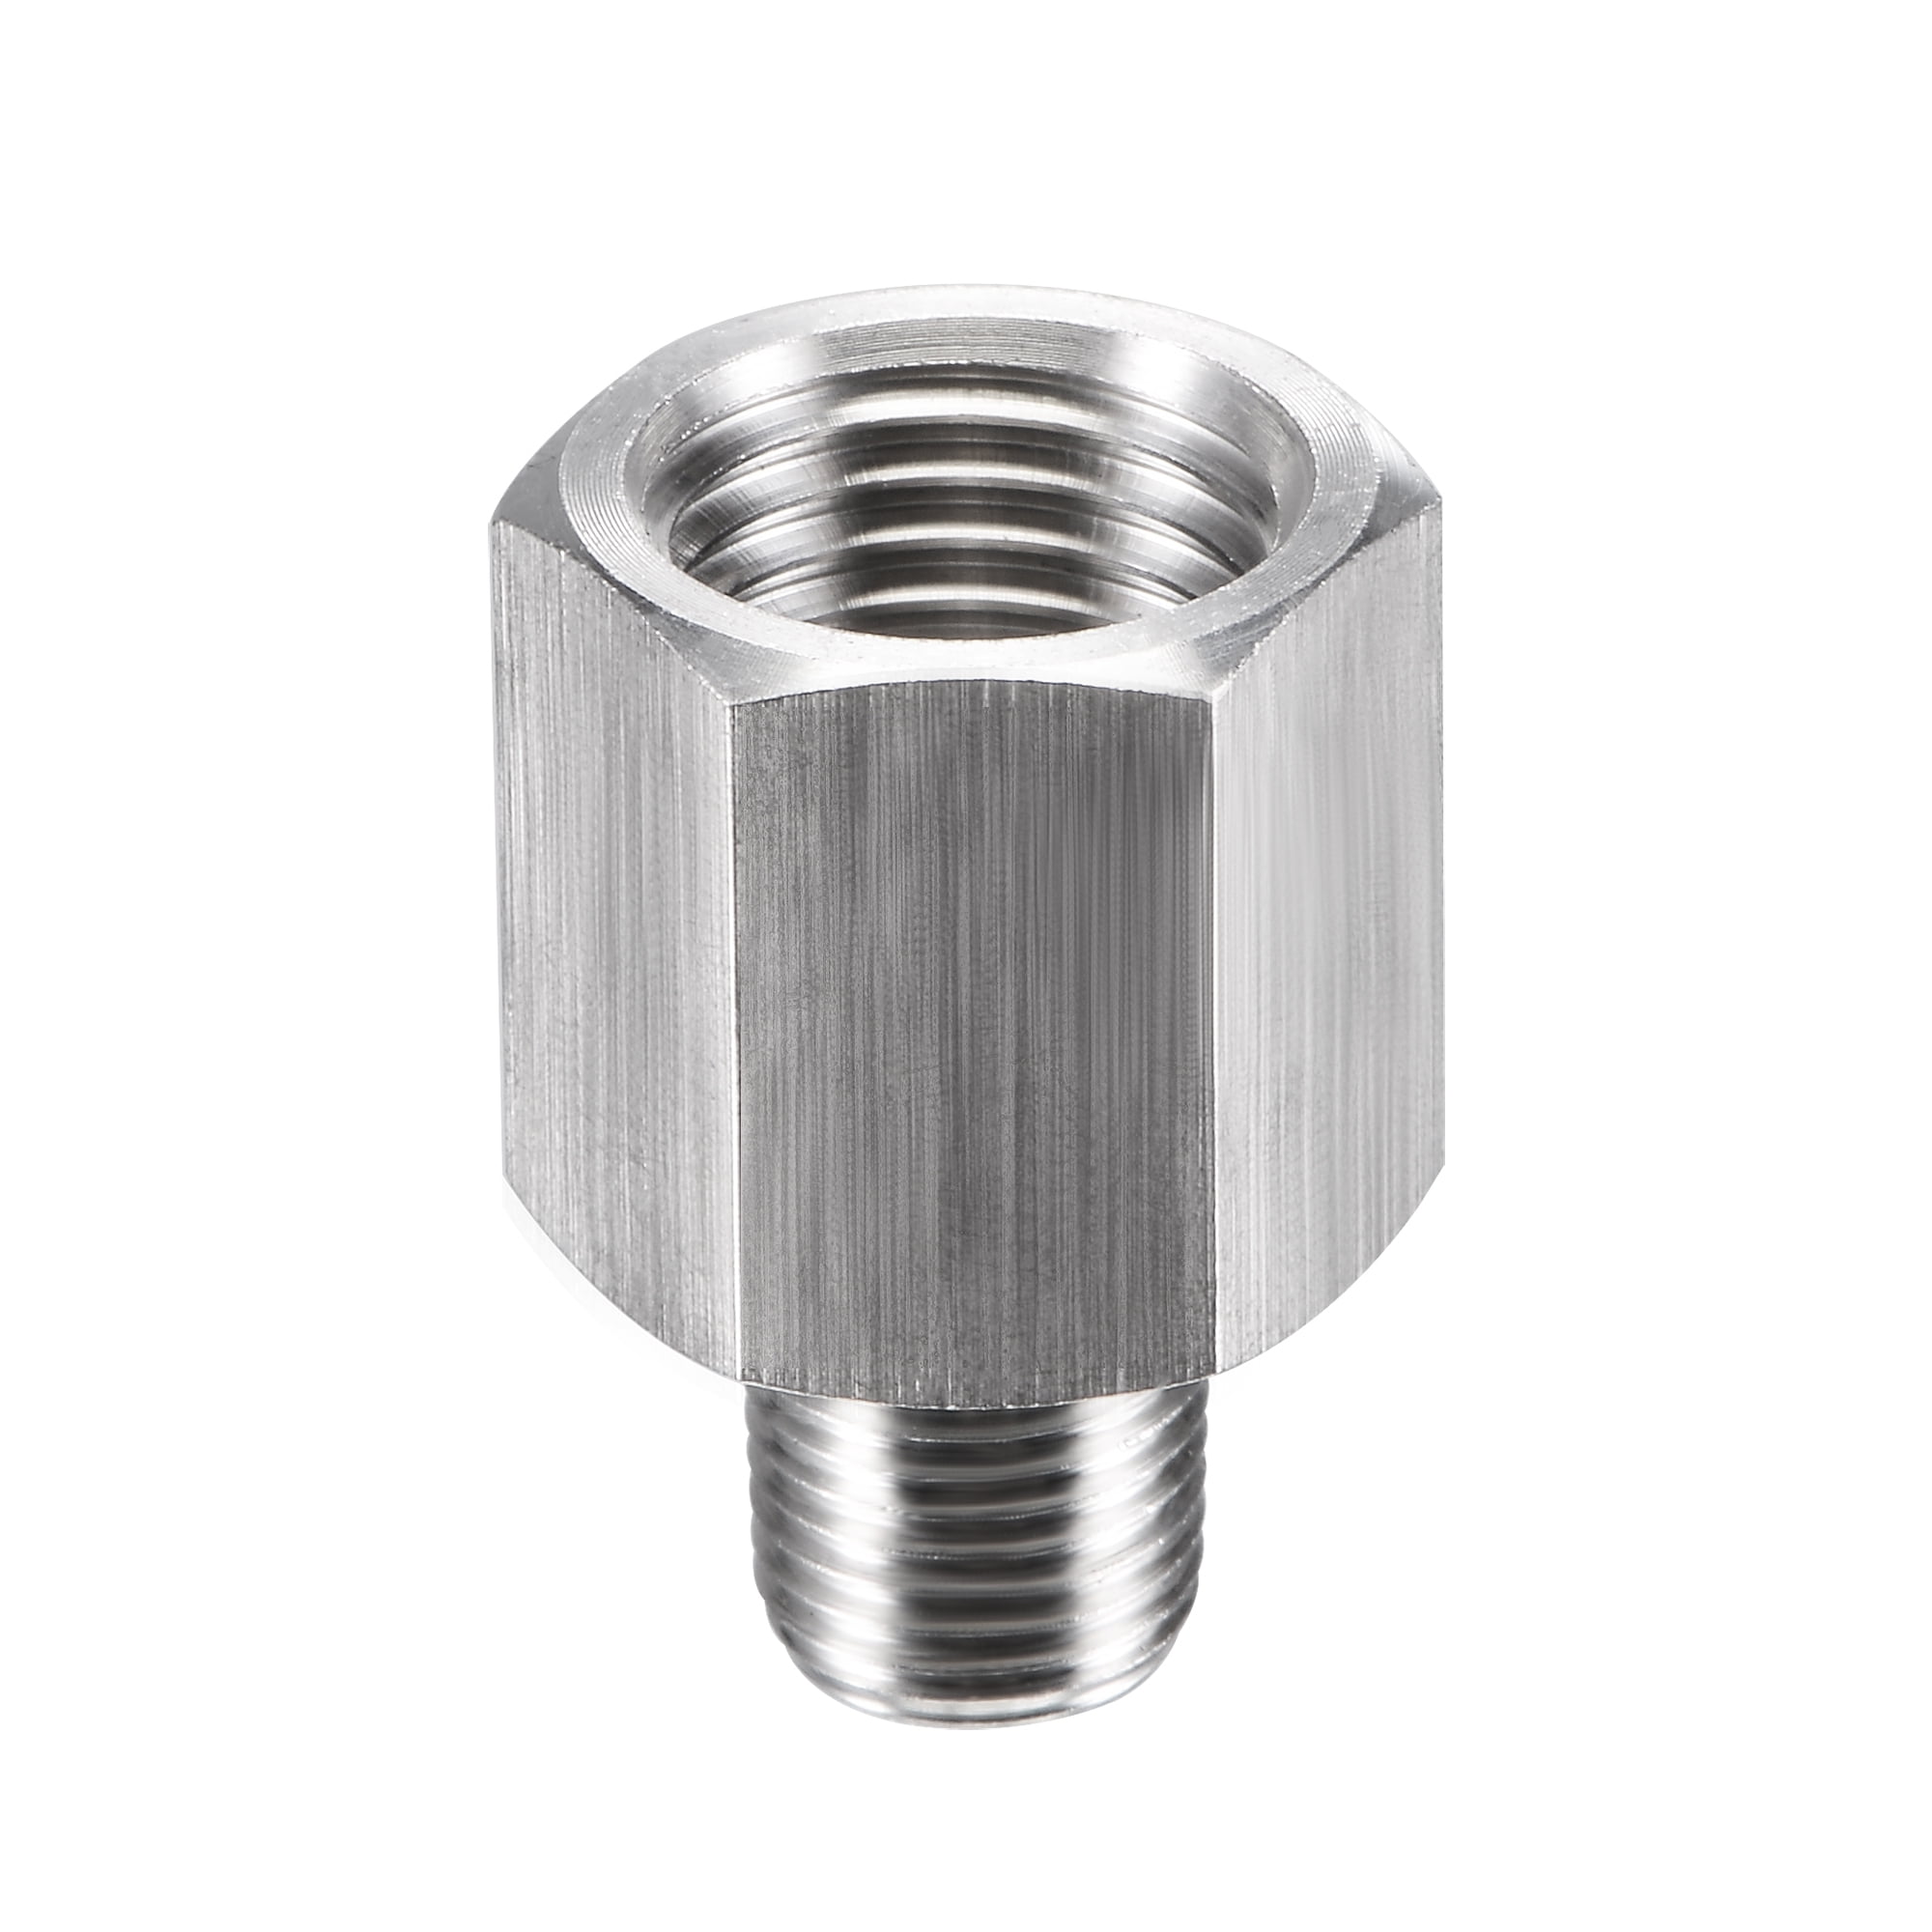 Unique Bargains Pipe Fitting Reducer Adapter 1/8 NPT Male x 1/4 NPT  Female for Water Oil Pressure Gauge, Stainless 